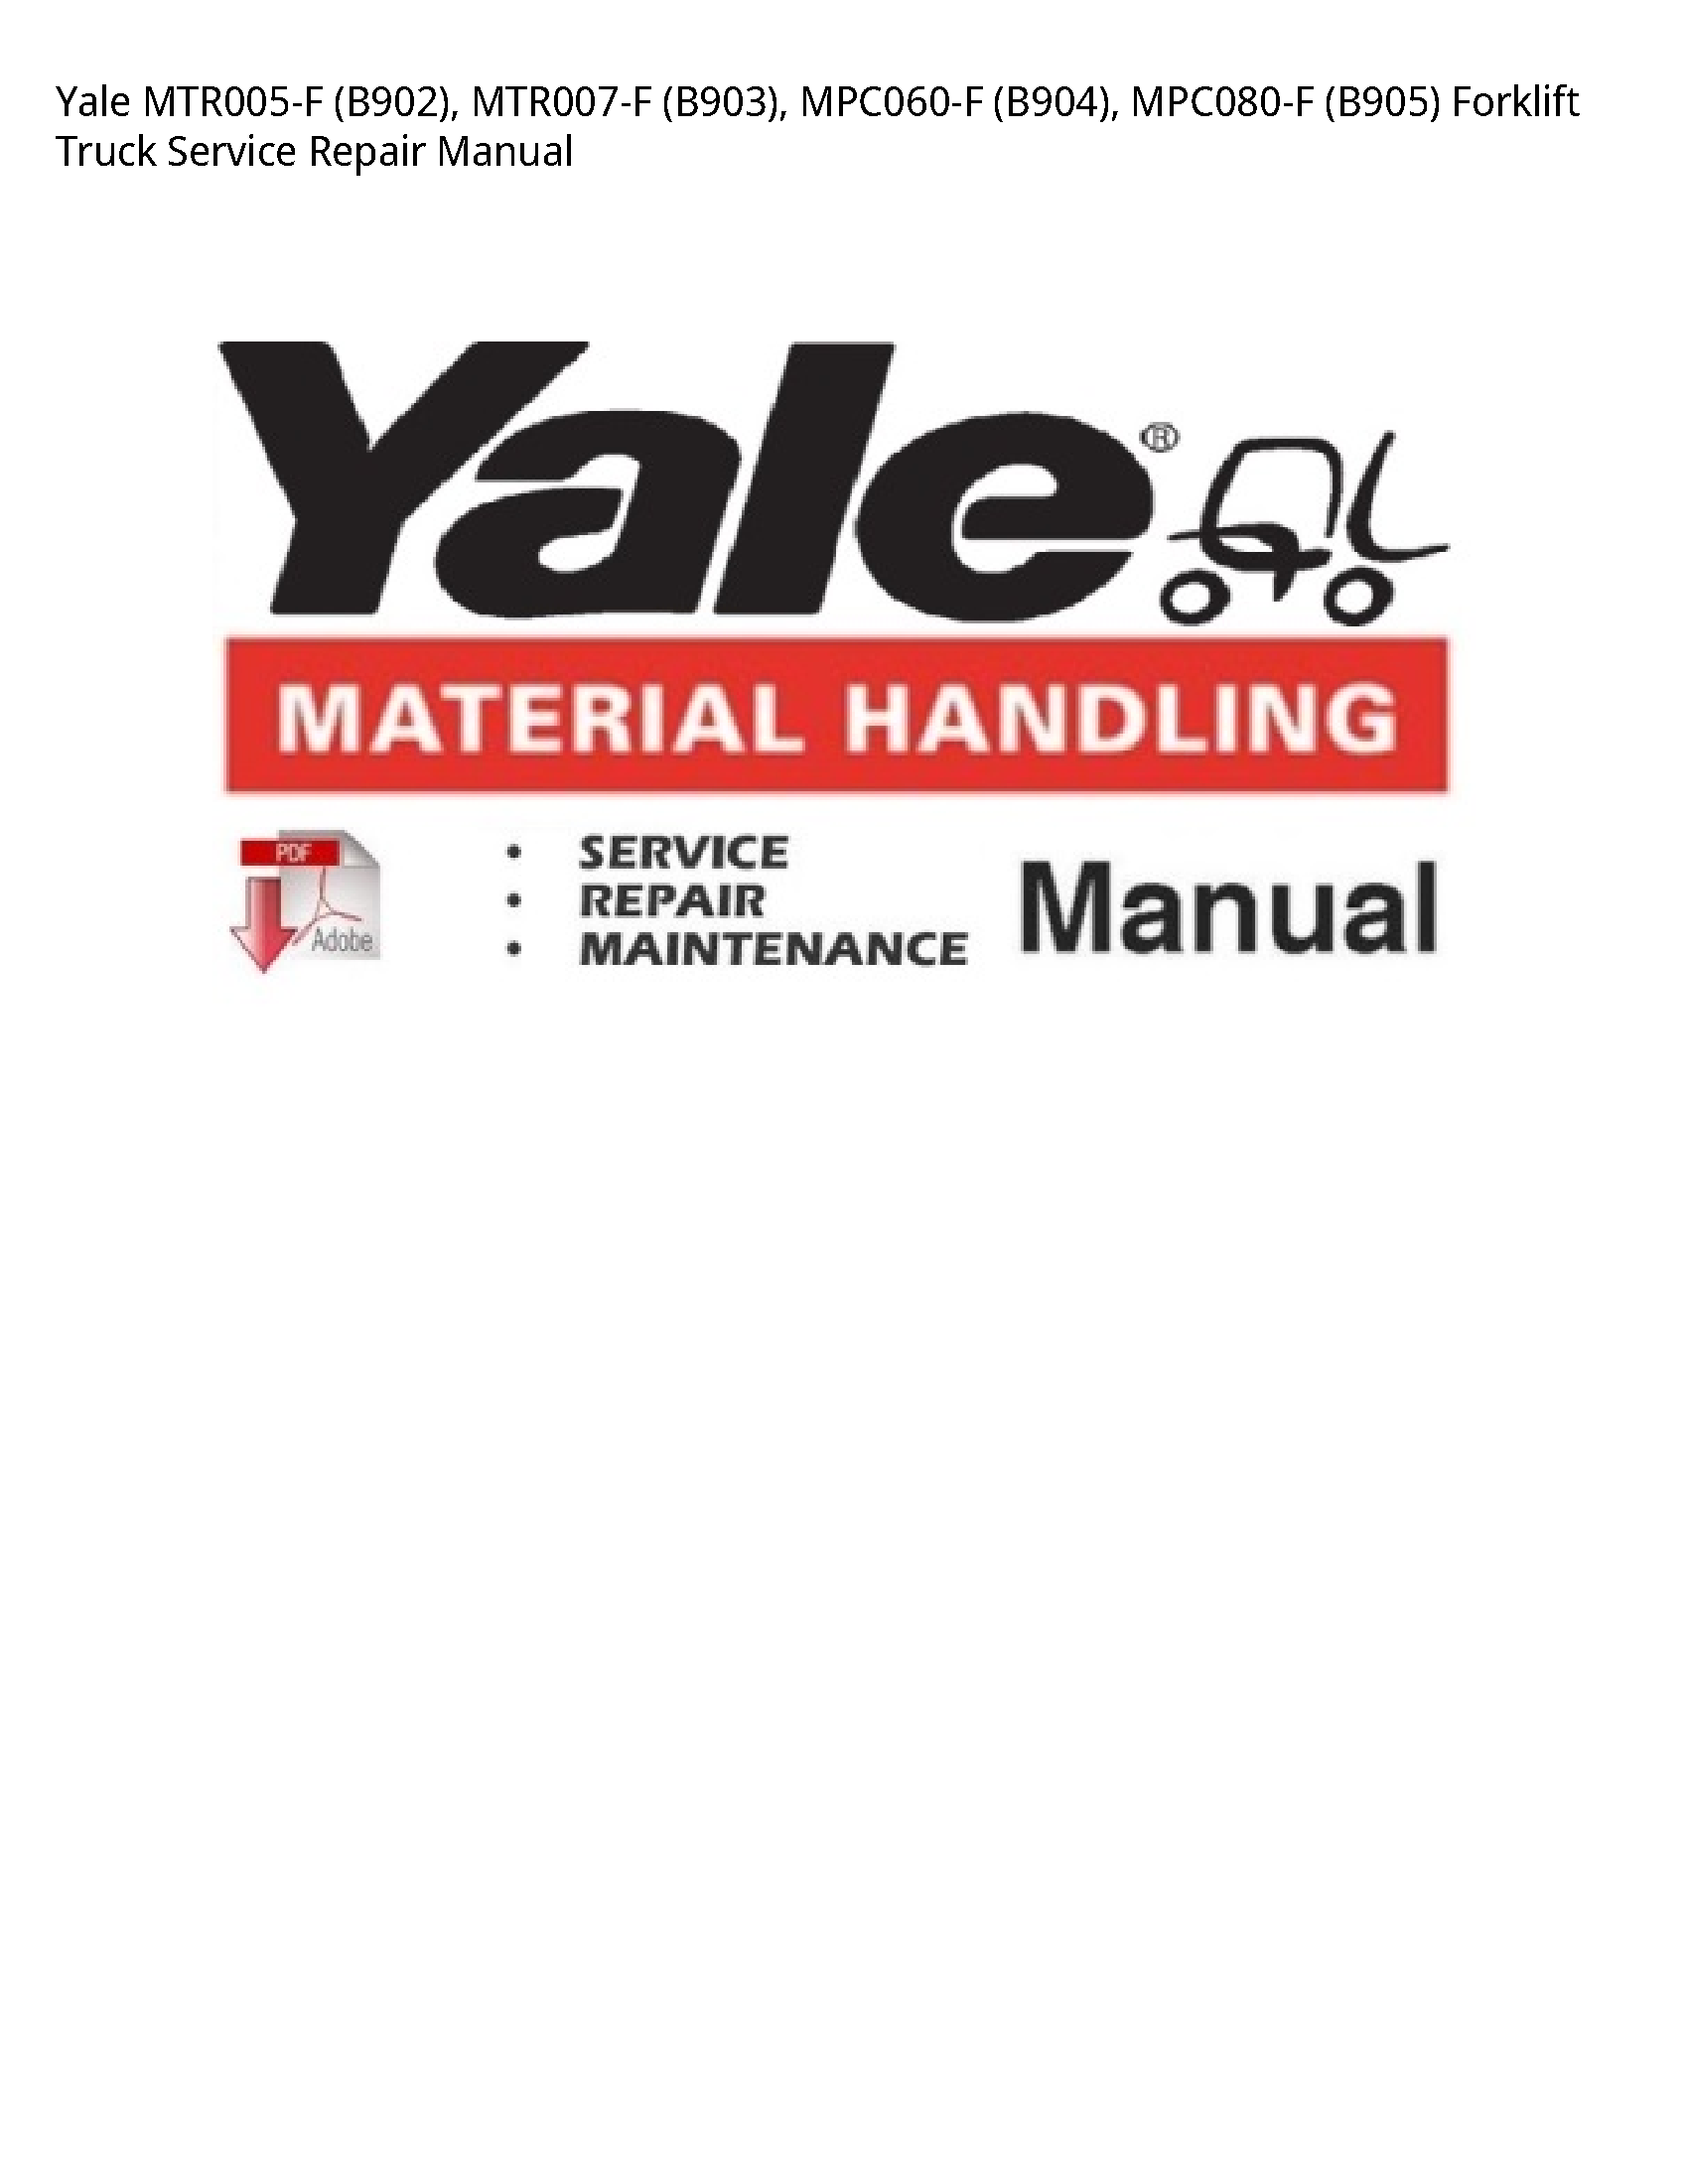 Yale MTR005-F Forklift Truck manual